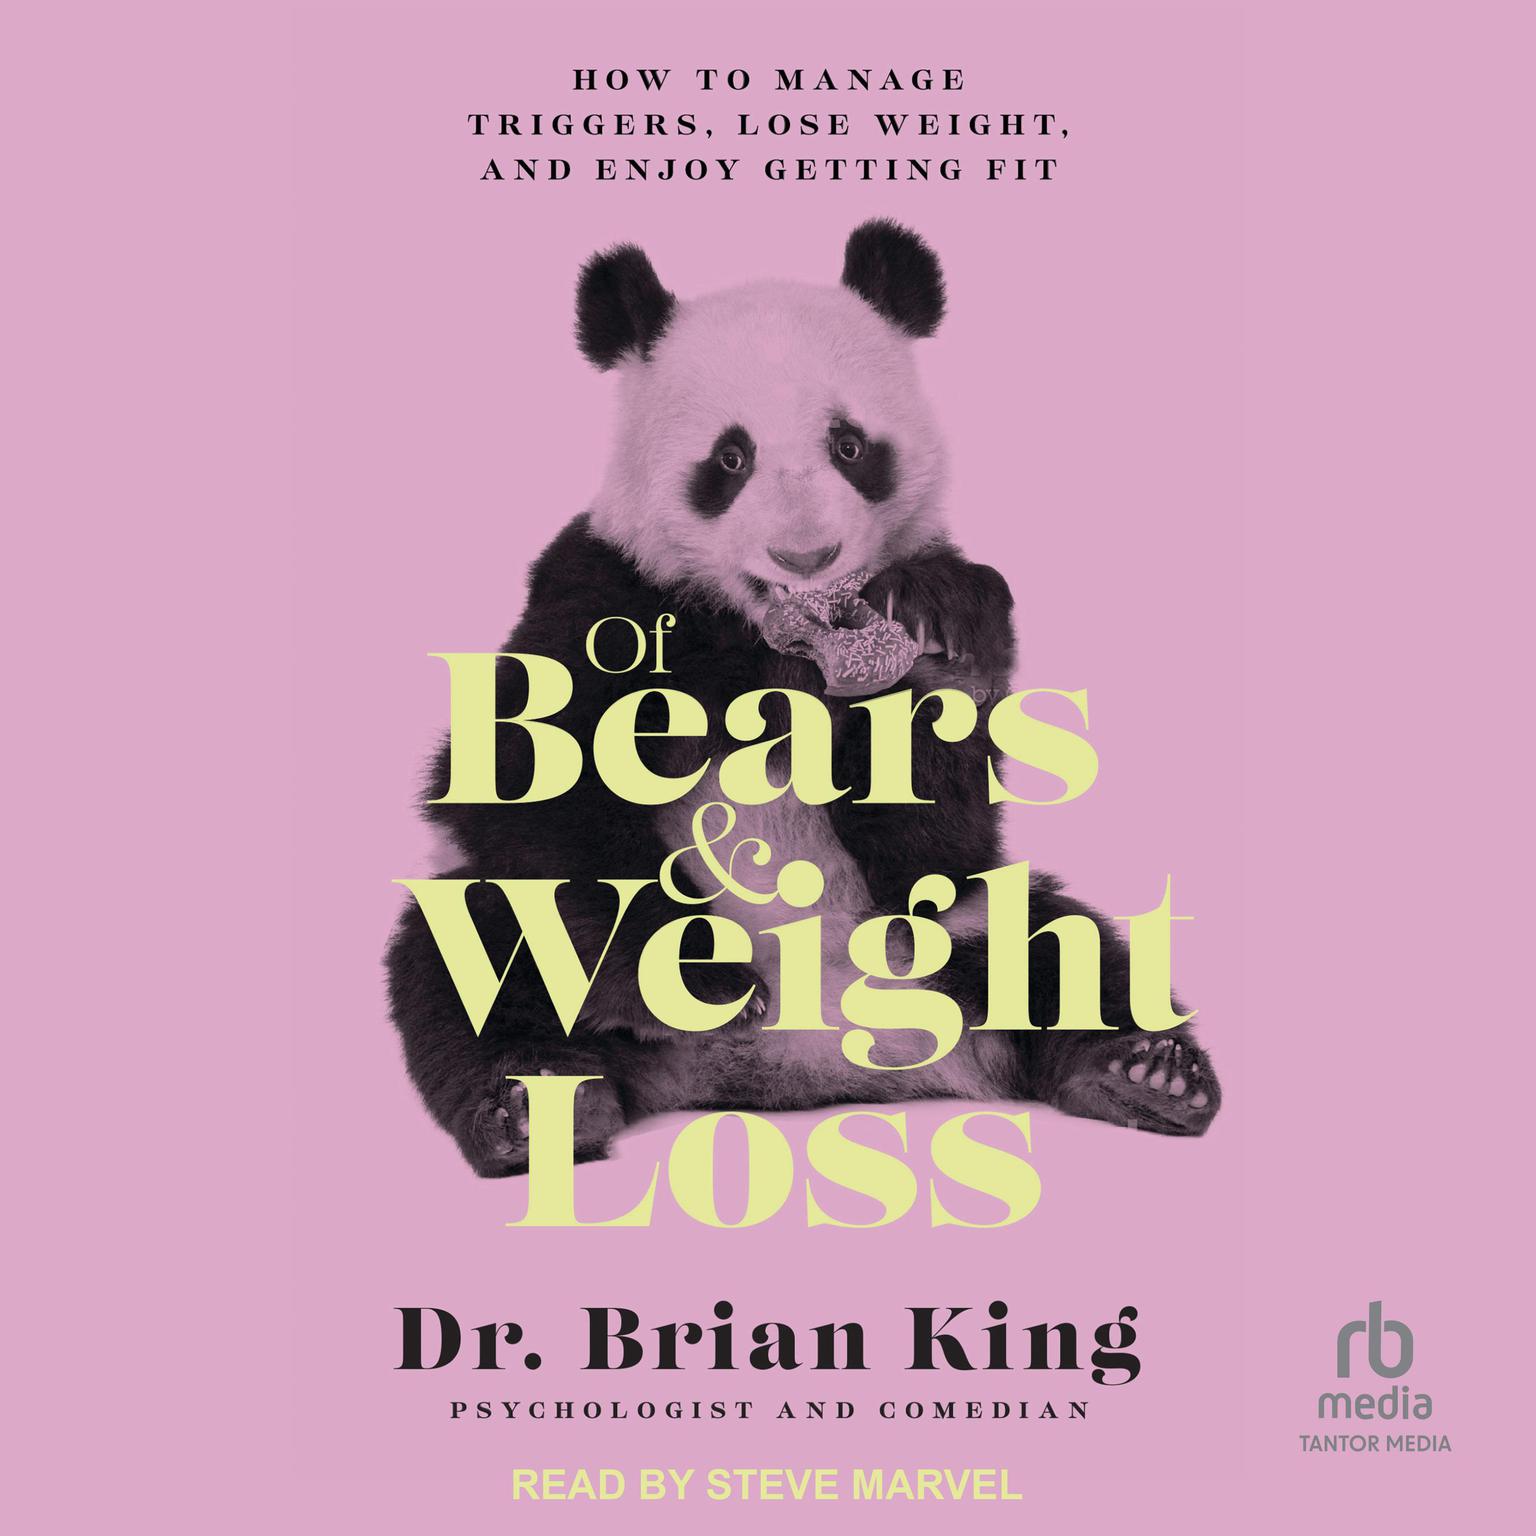 Of Bears and Weight Loss: How to Manage Triggers, Lose Weight, and Enjoy Getting Fit Audiobook, by Brian King